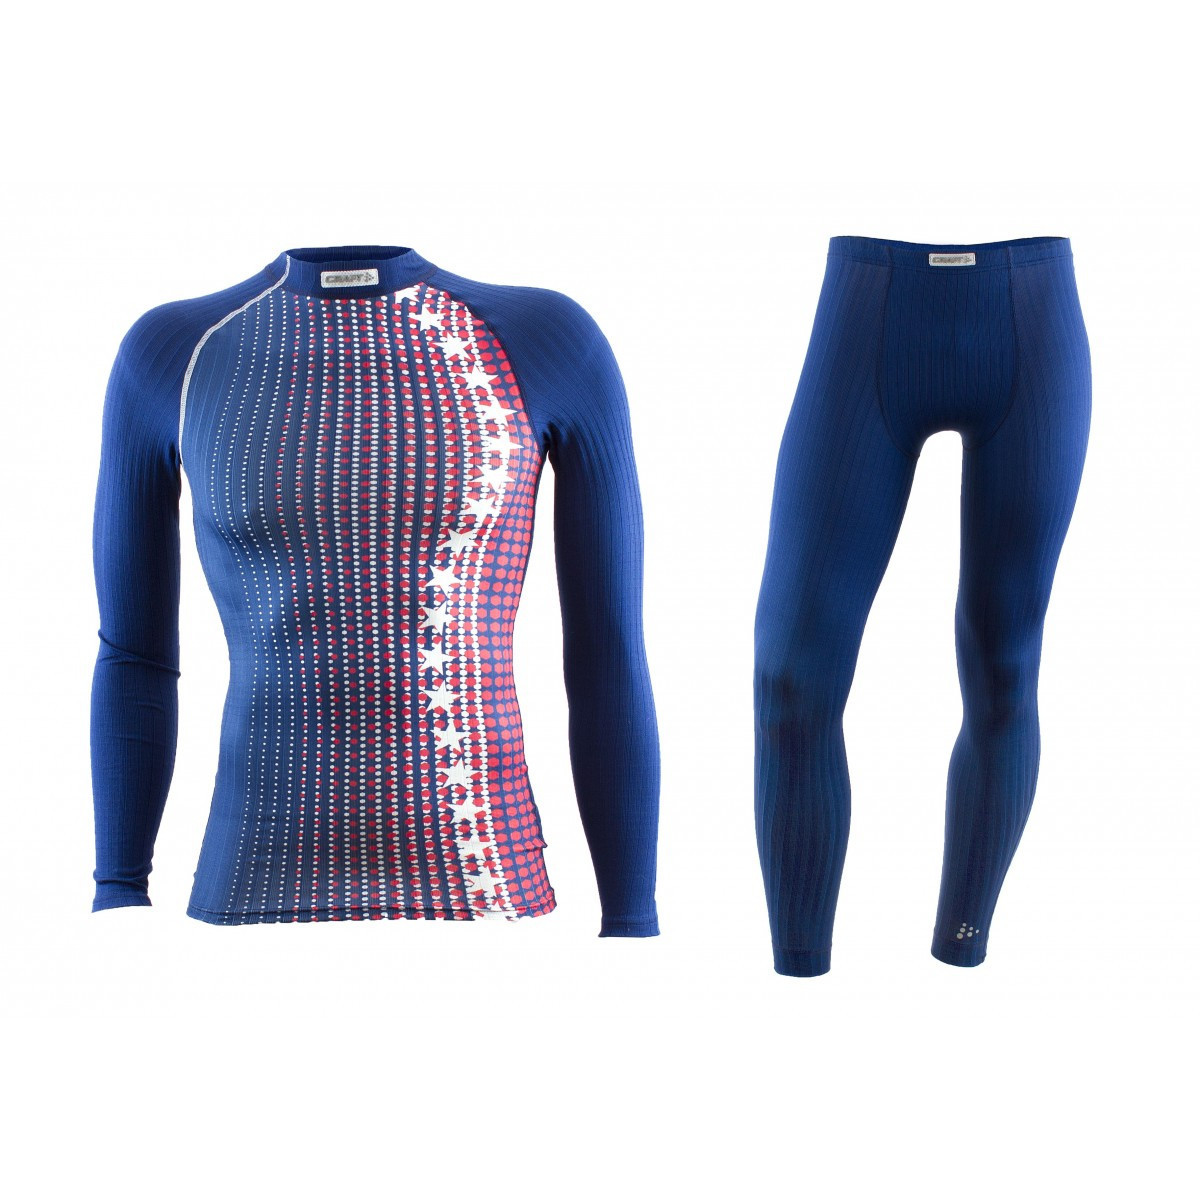 Craft Men's Stars and Stripes Active Extreme Baselayer Set - 2018